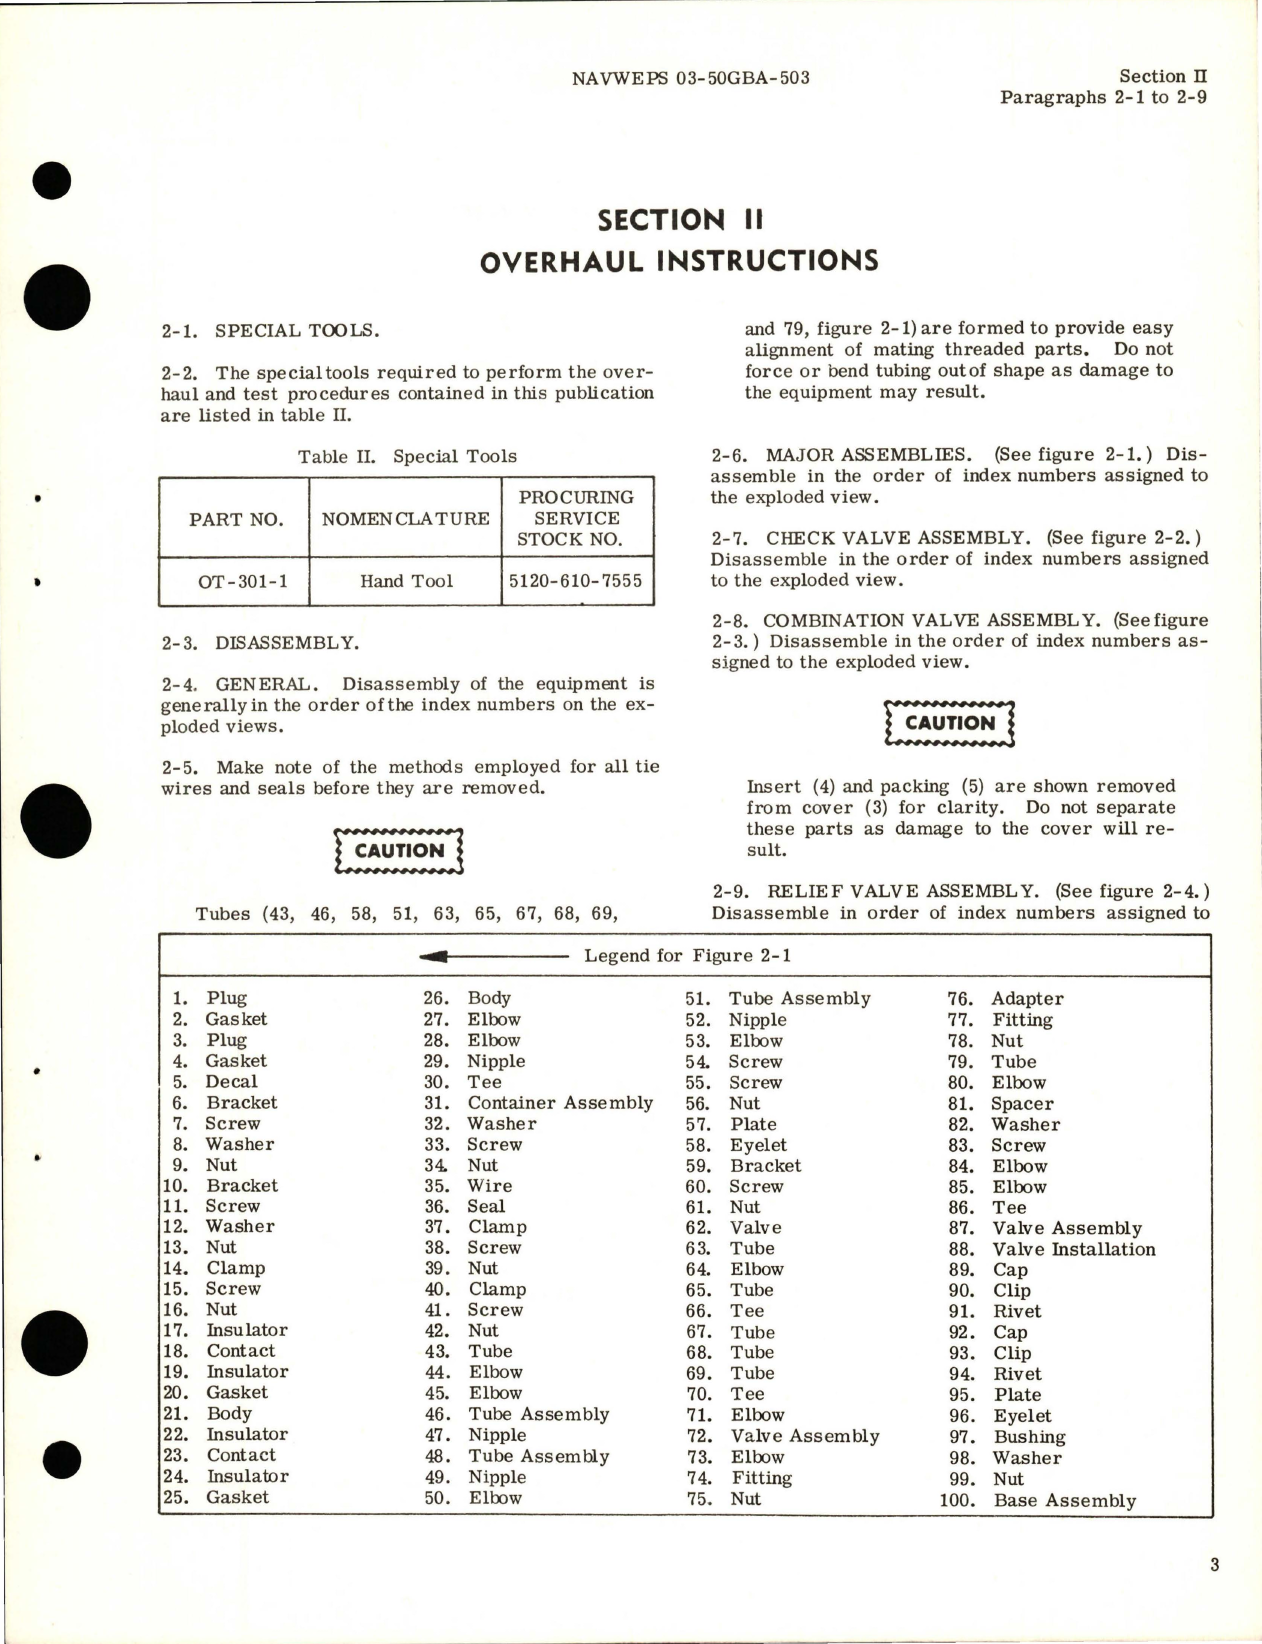 Sample page 7 from AirCorps Library document: Overhaul Instructions for 5-Liter Liquid Oxygen Converter - Part 21150 